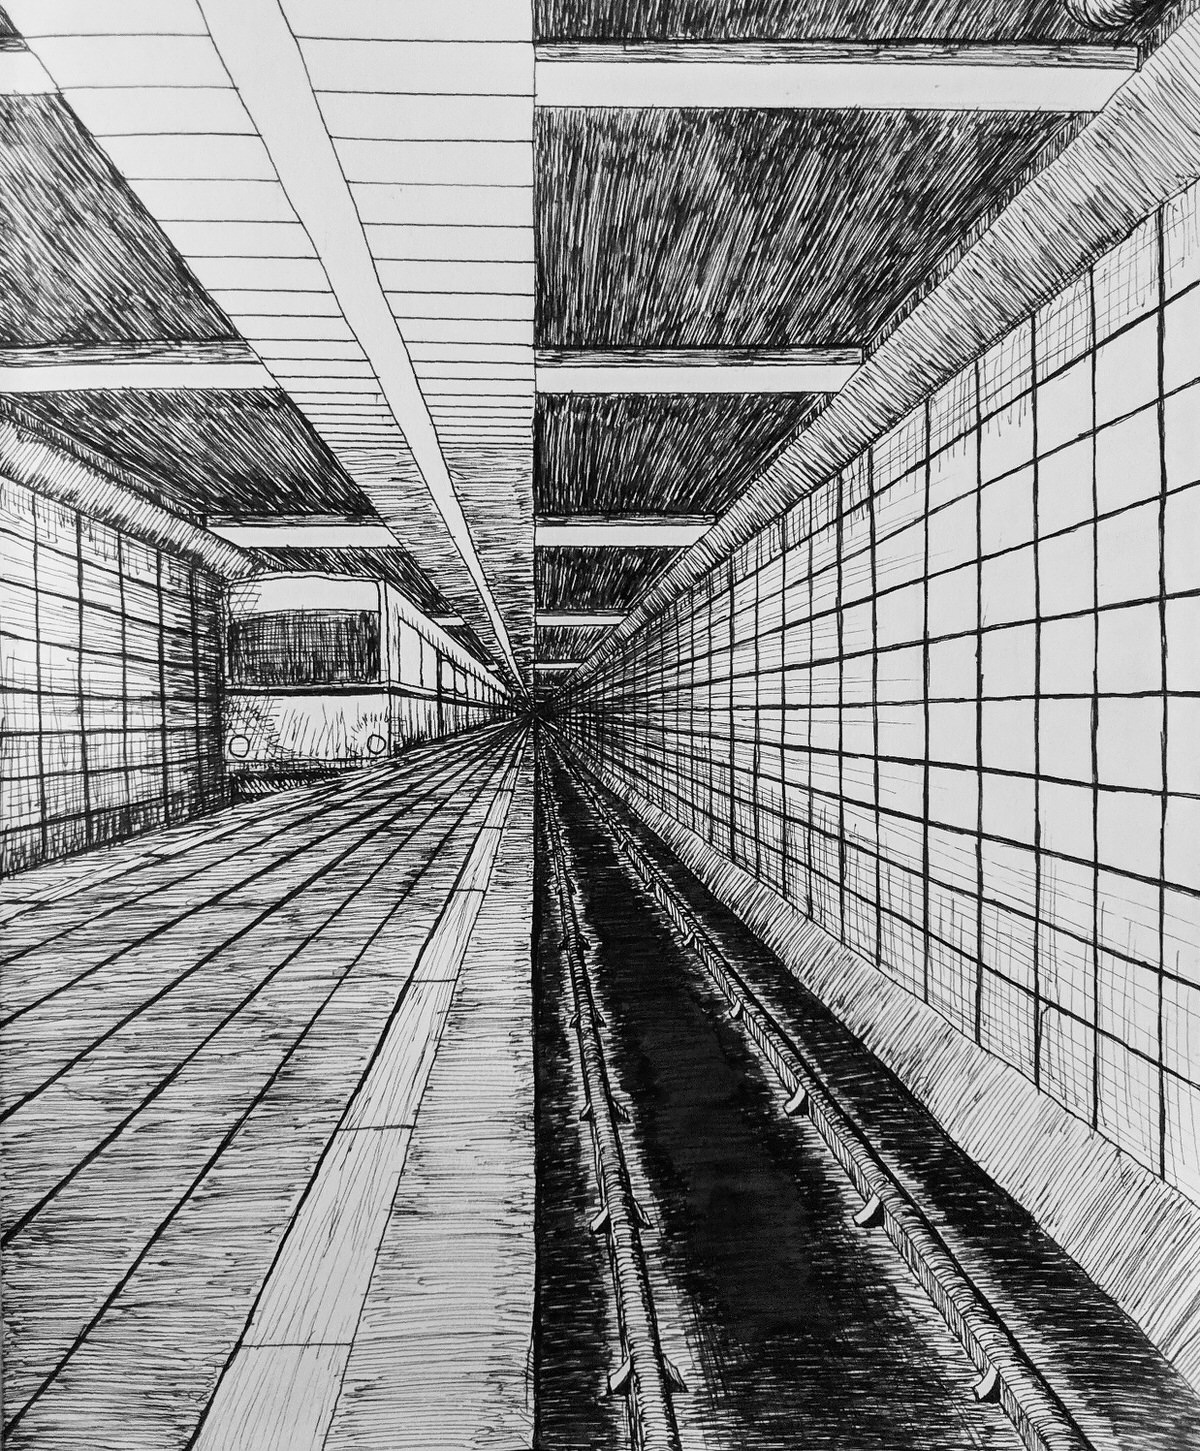 Subway station as one-point perspective.